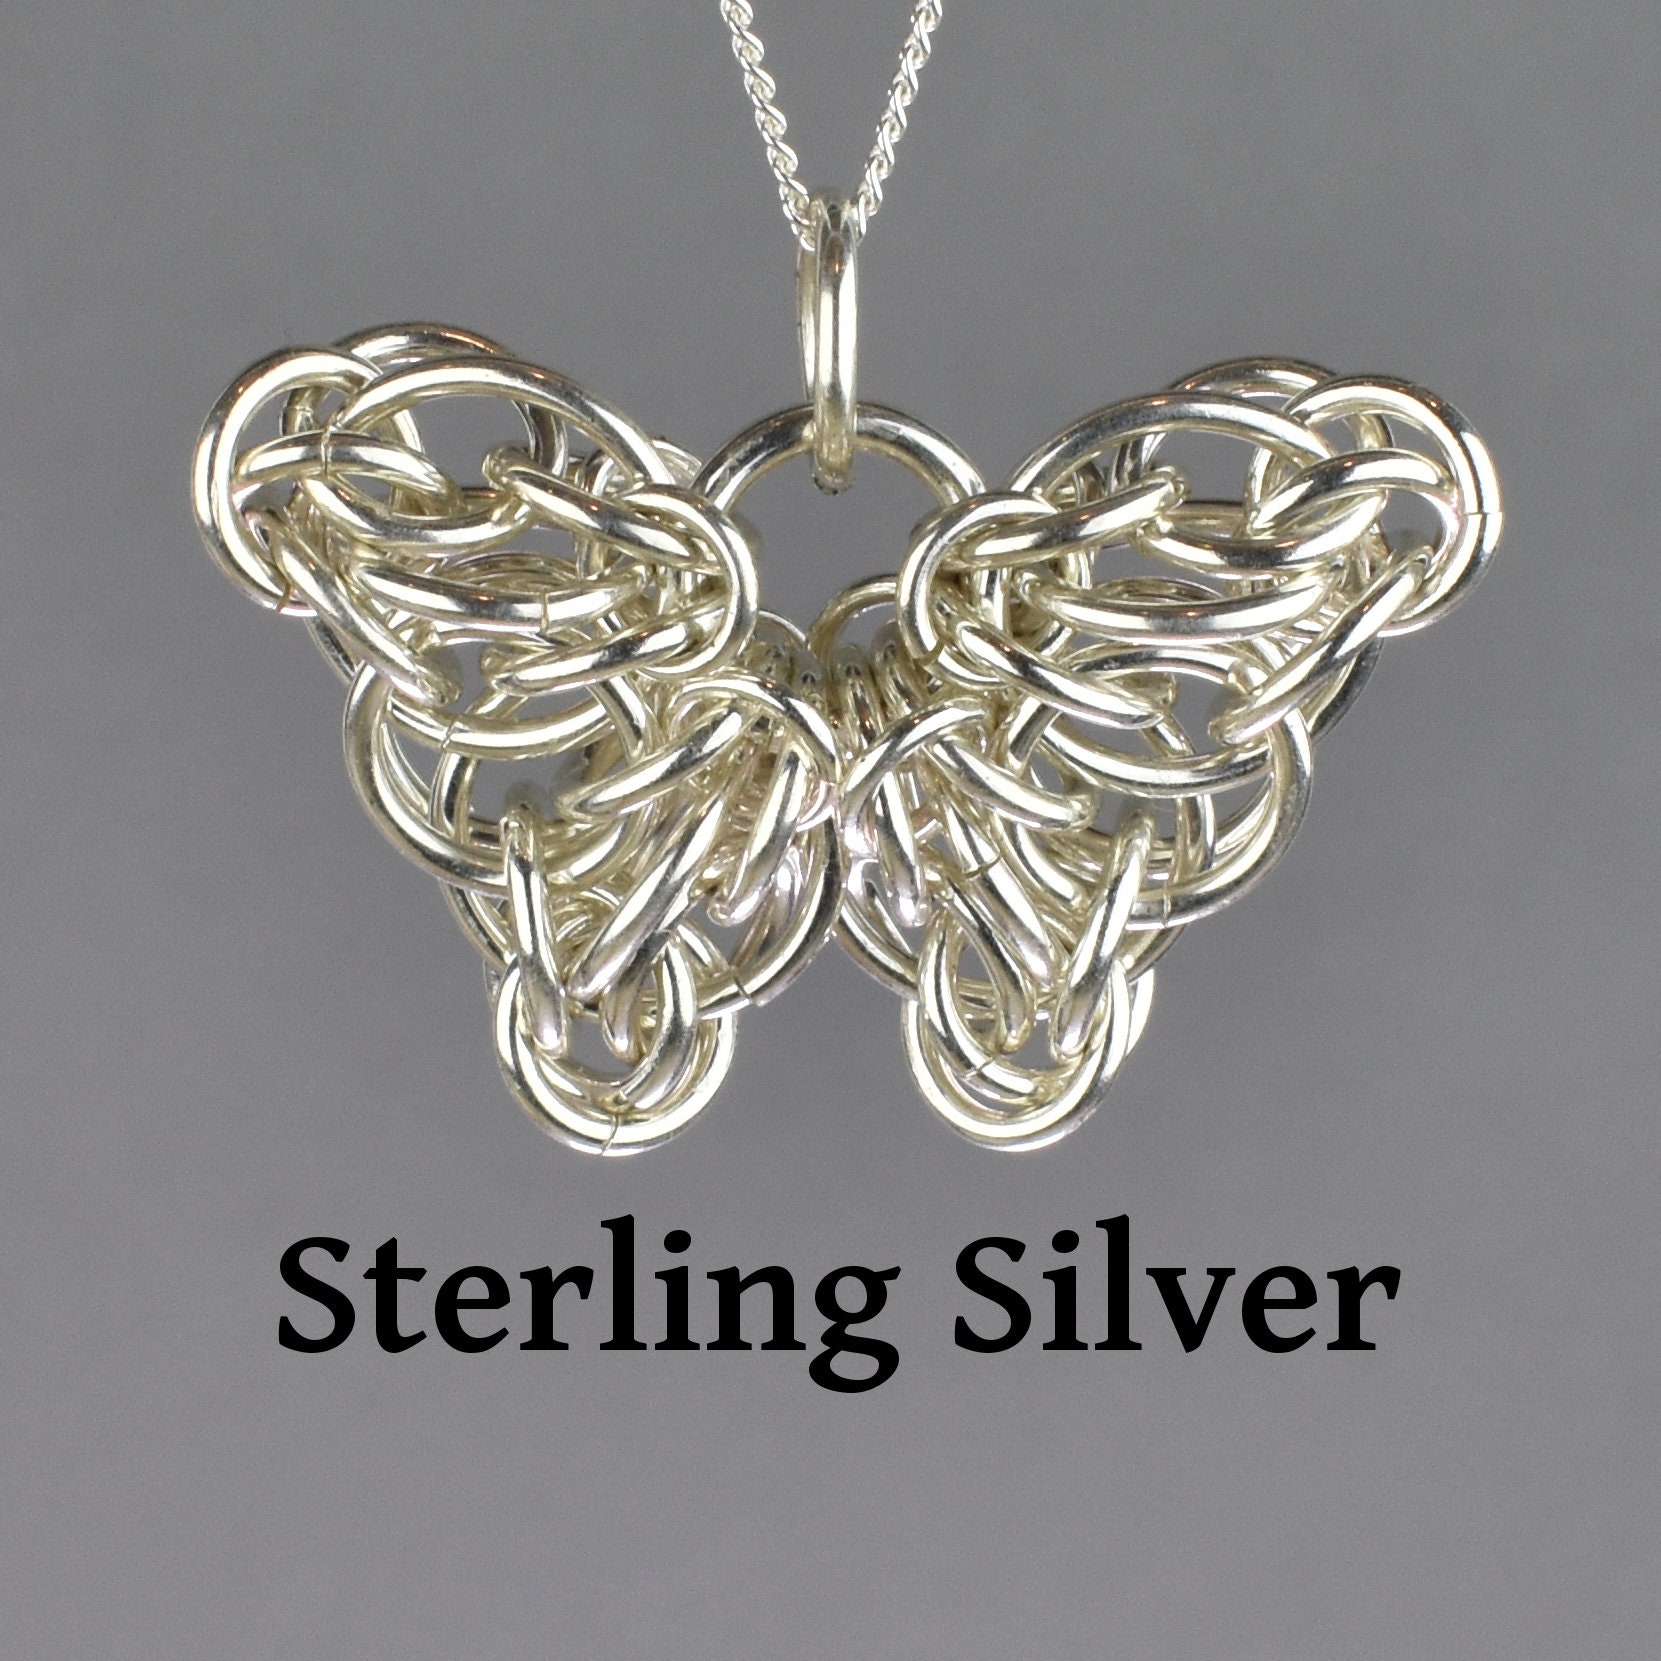 StreetMaille — Learn to make a beautiful butterfly pendant